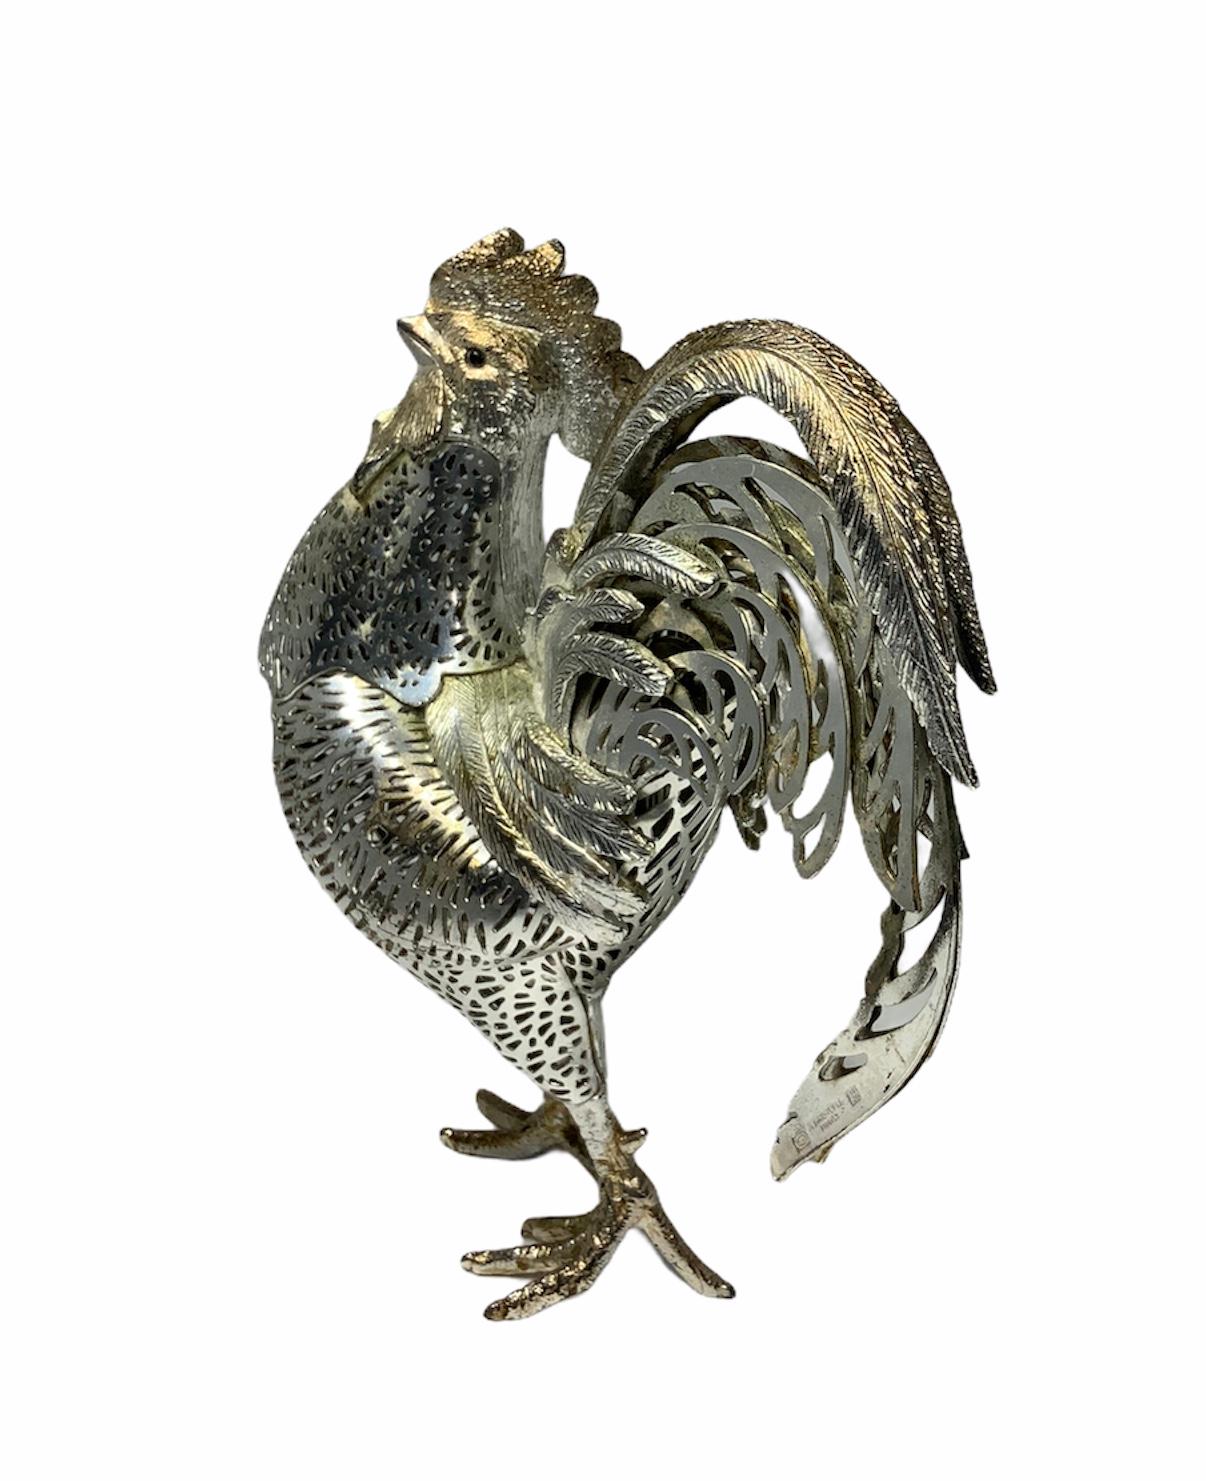 20th Century Christofle, France Silver Plated Rooster Sculpture/Figurine